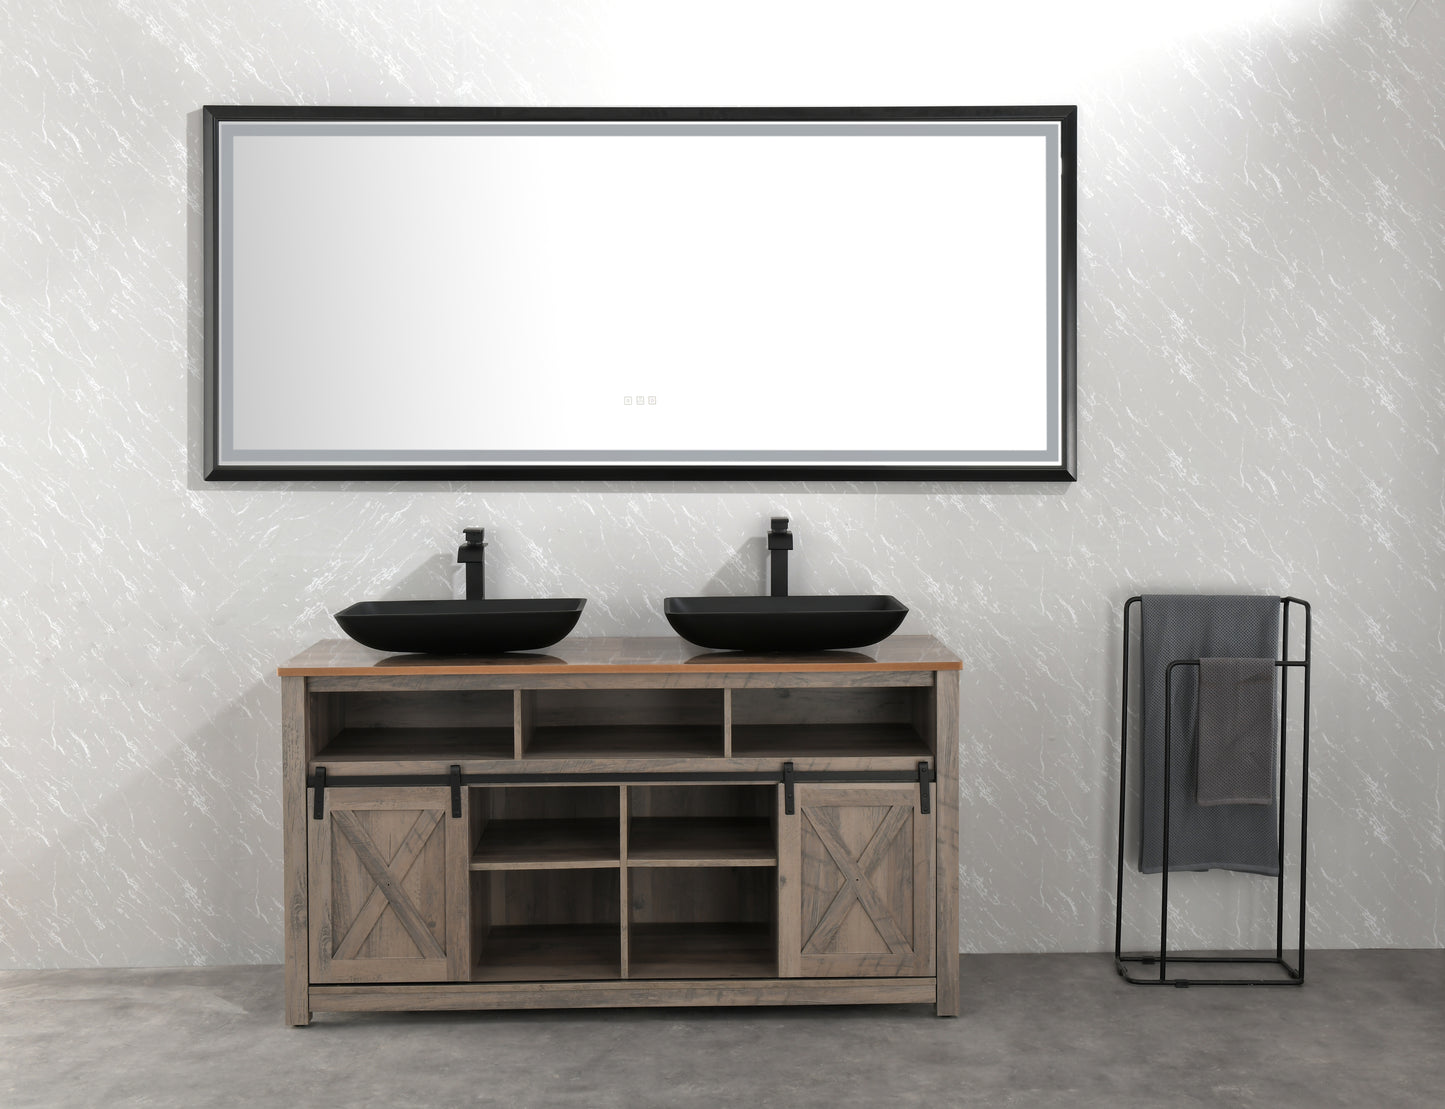 LTL needs to consult the warehouse address88*38 Black Framed Metal FrameBathroom Mirror Square Wall-Mounted Material Framed Explosion-Proof  Vanity Mirror Shaving Mirror Magnifying Mirror